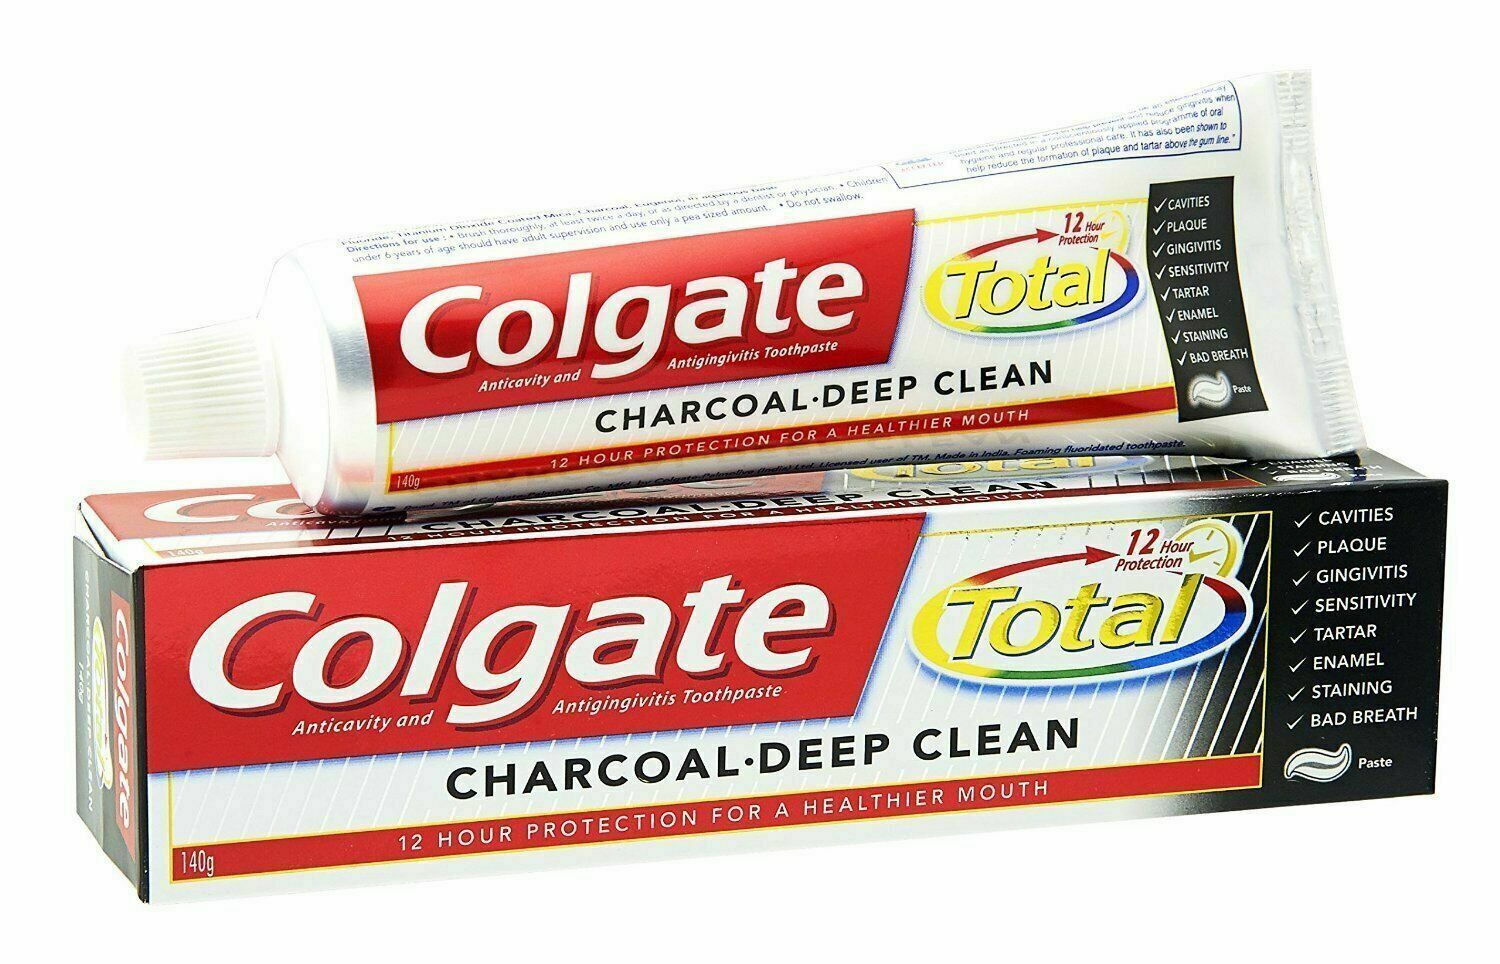 Colgate Charcoal Deep Clean Total Whole Mouth Health Toothpaste,120gm, Pack of 1